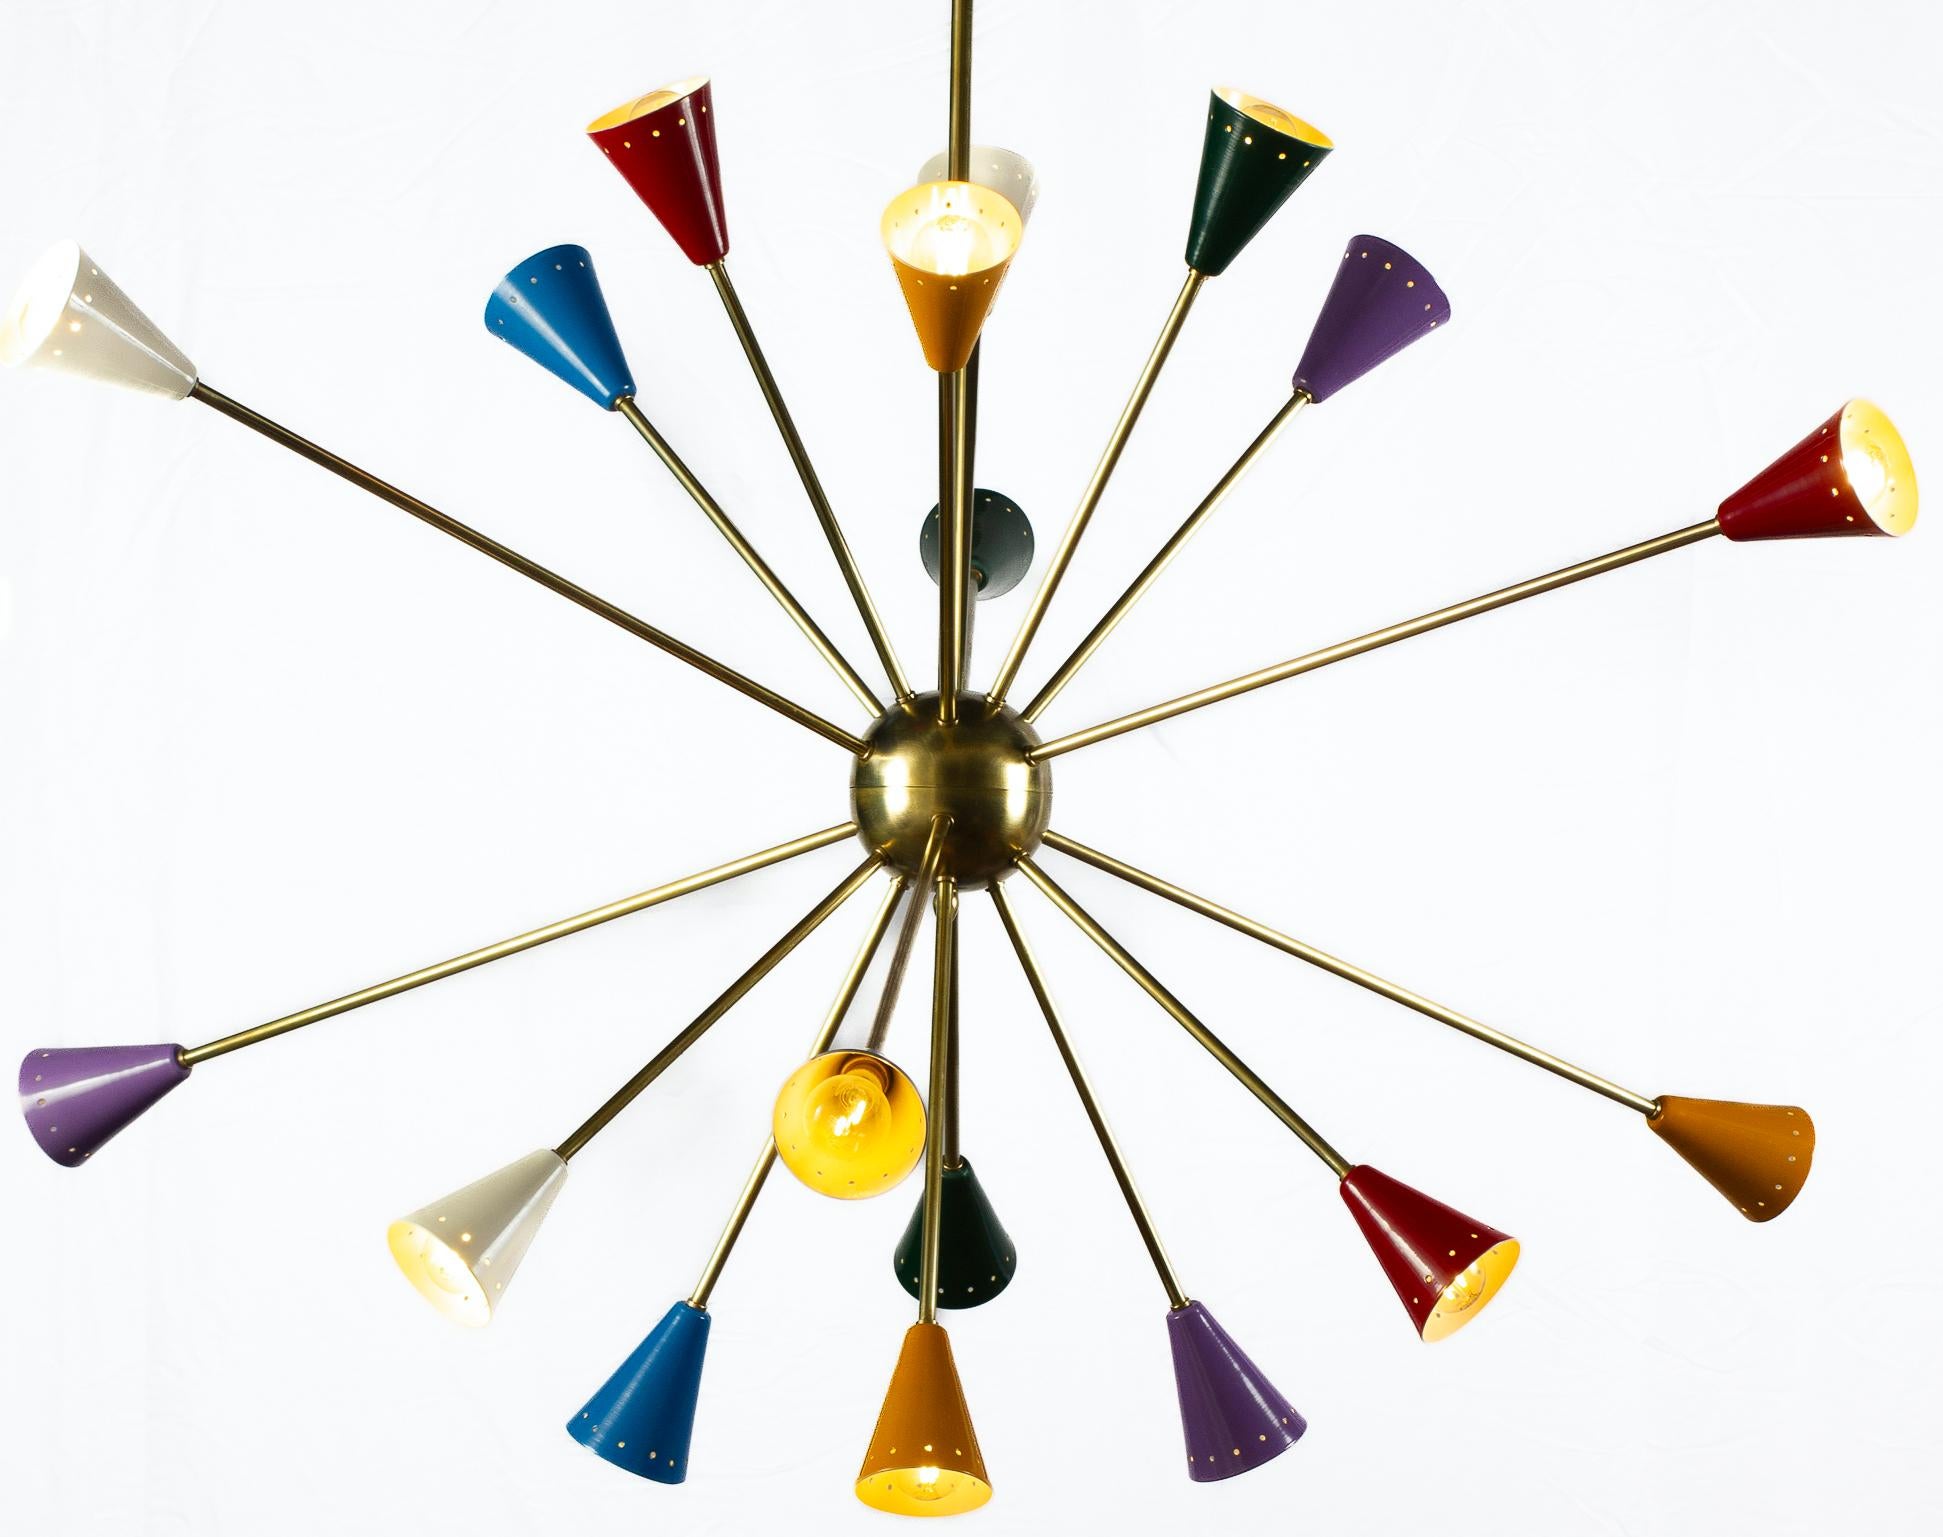 Features 18 brass arms, each sporting multicolored, perforated shades. Gold central sphere.
Bearing a circa 1970s label in the canopy.
Commonly called 'Sputnik' chandeliers today (in honor of the Russian satellite that inspired a war and a design